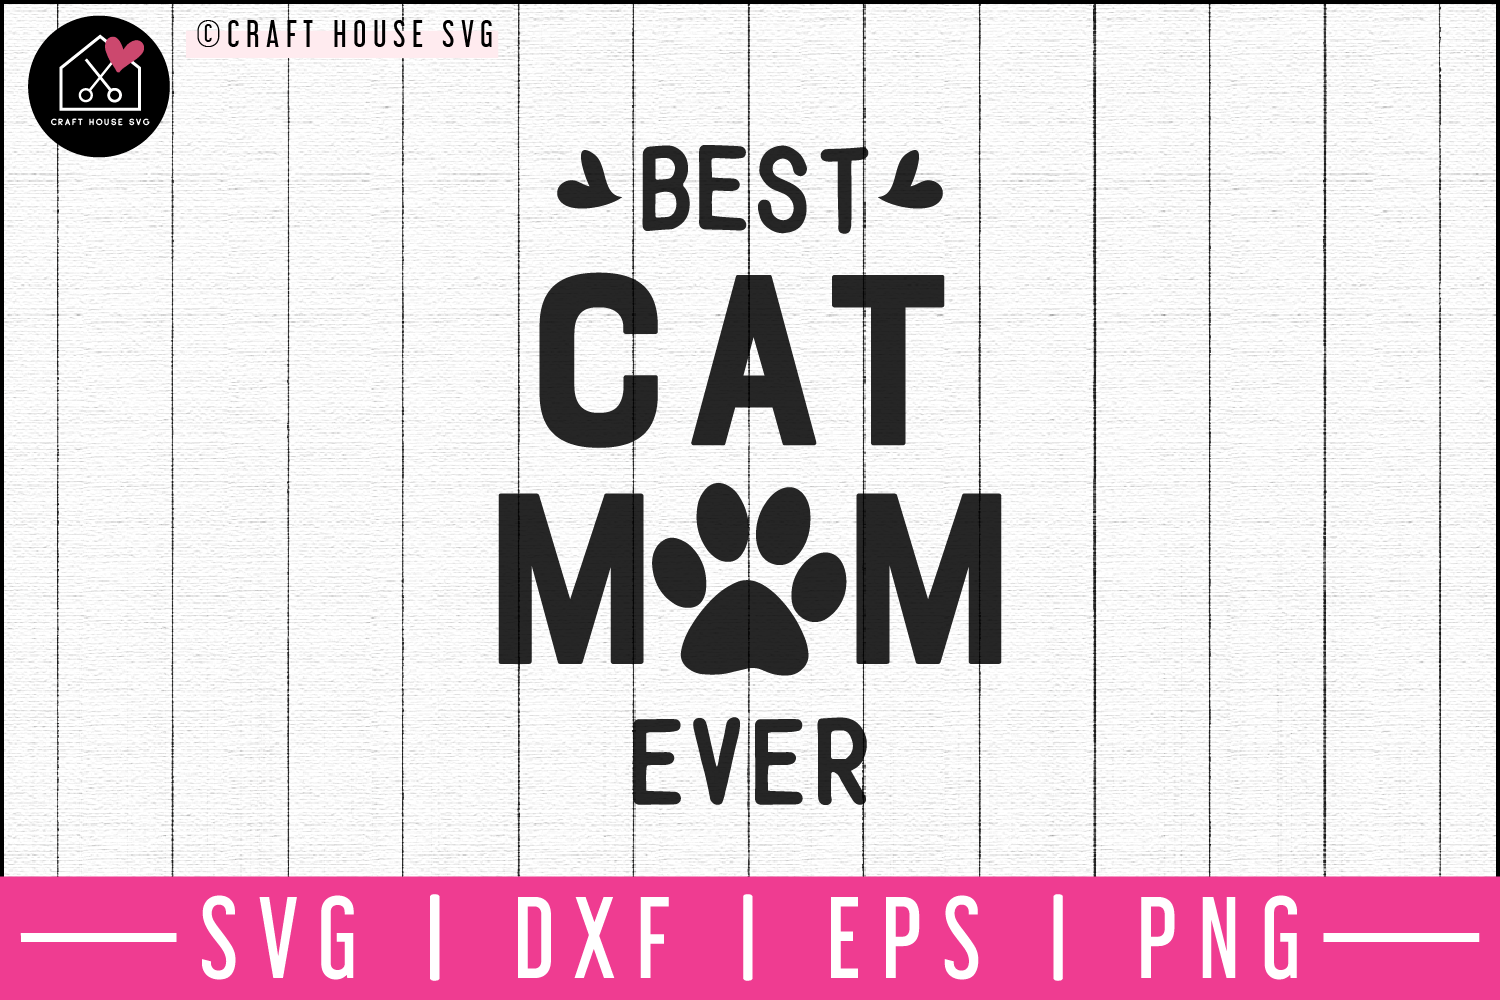 Best cat mom ever SVG | M52F Craft House SVG - SVG files for Cricut and Silhouette